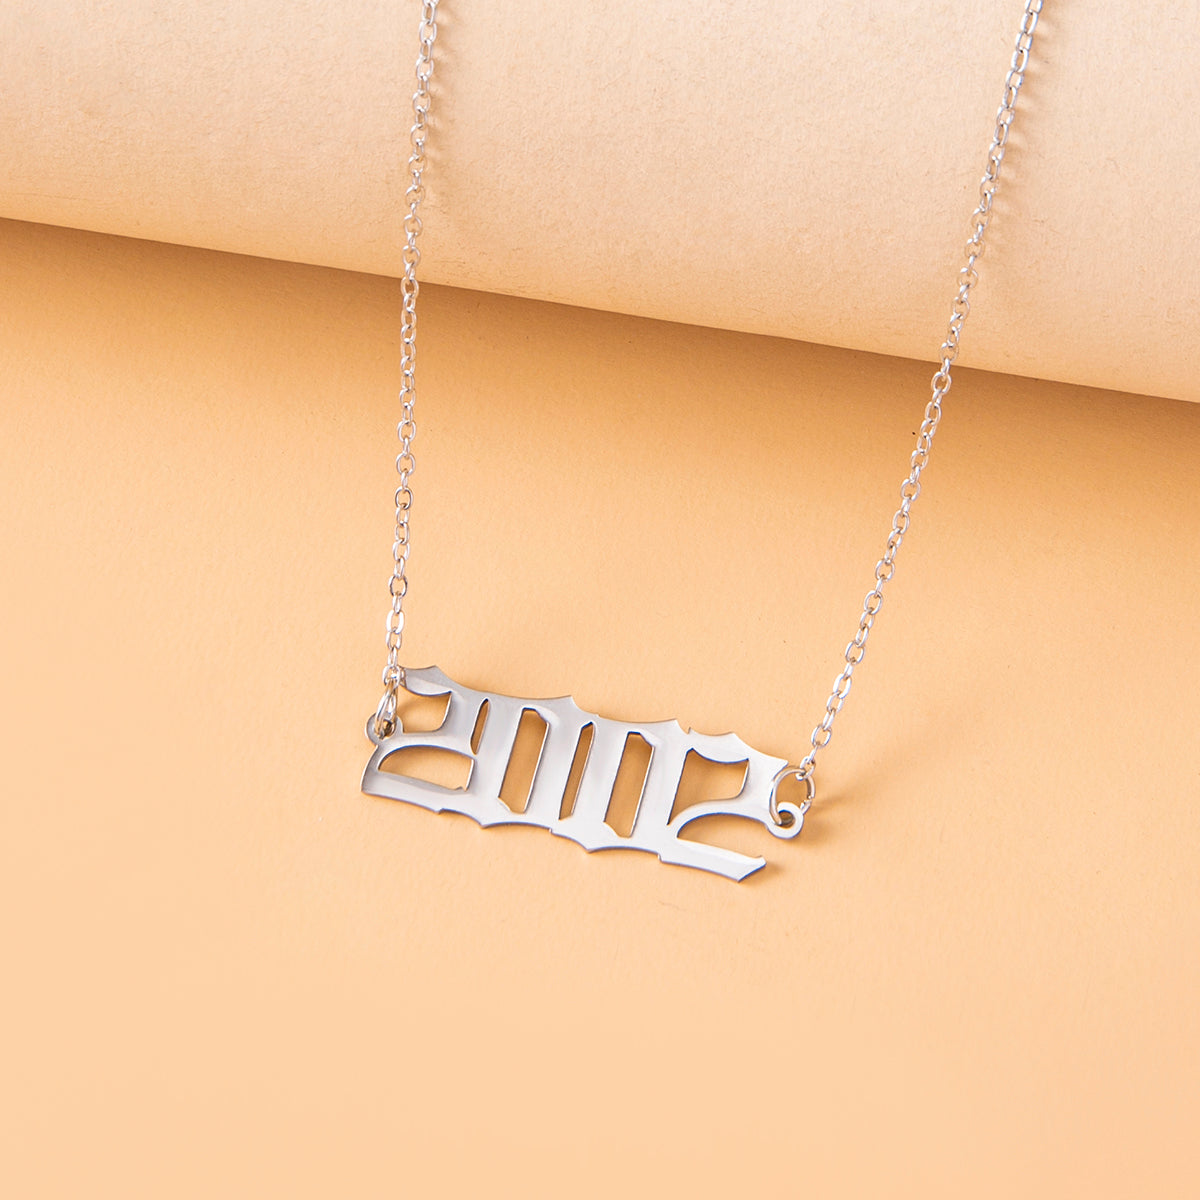 Year Number Necklaces For Women Birthday Date Gifts